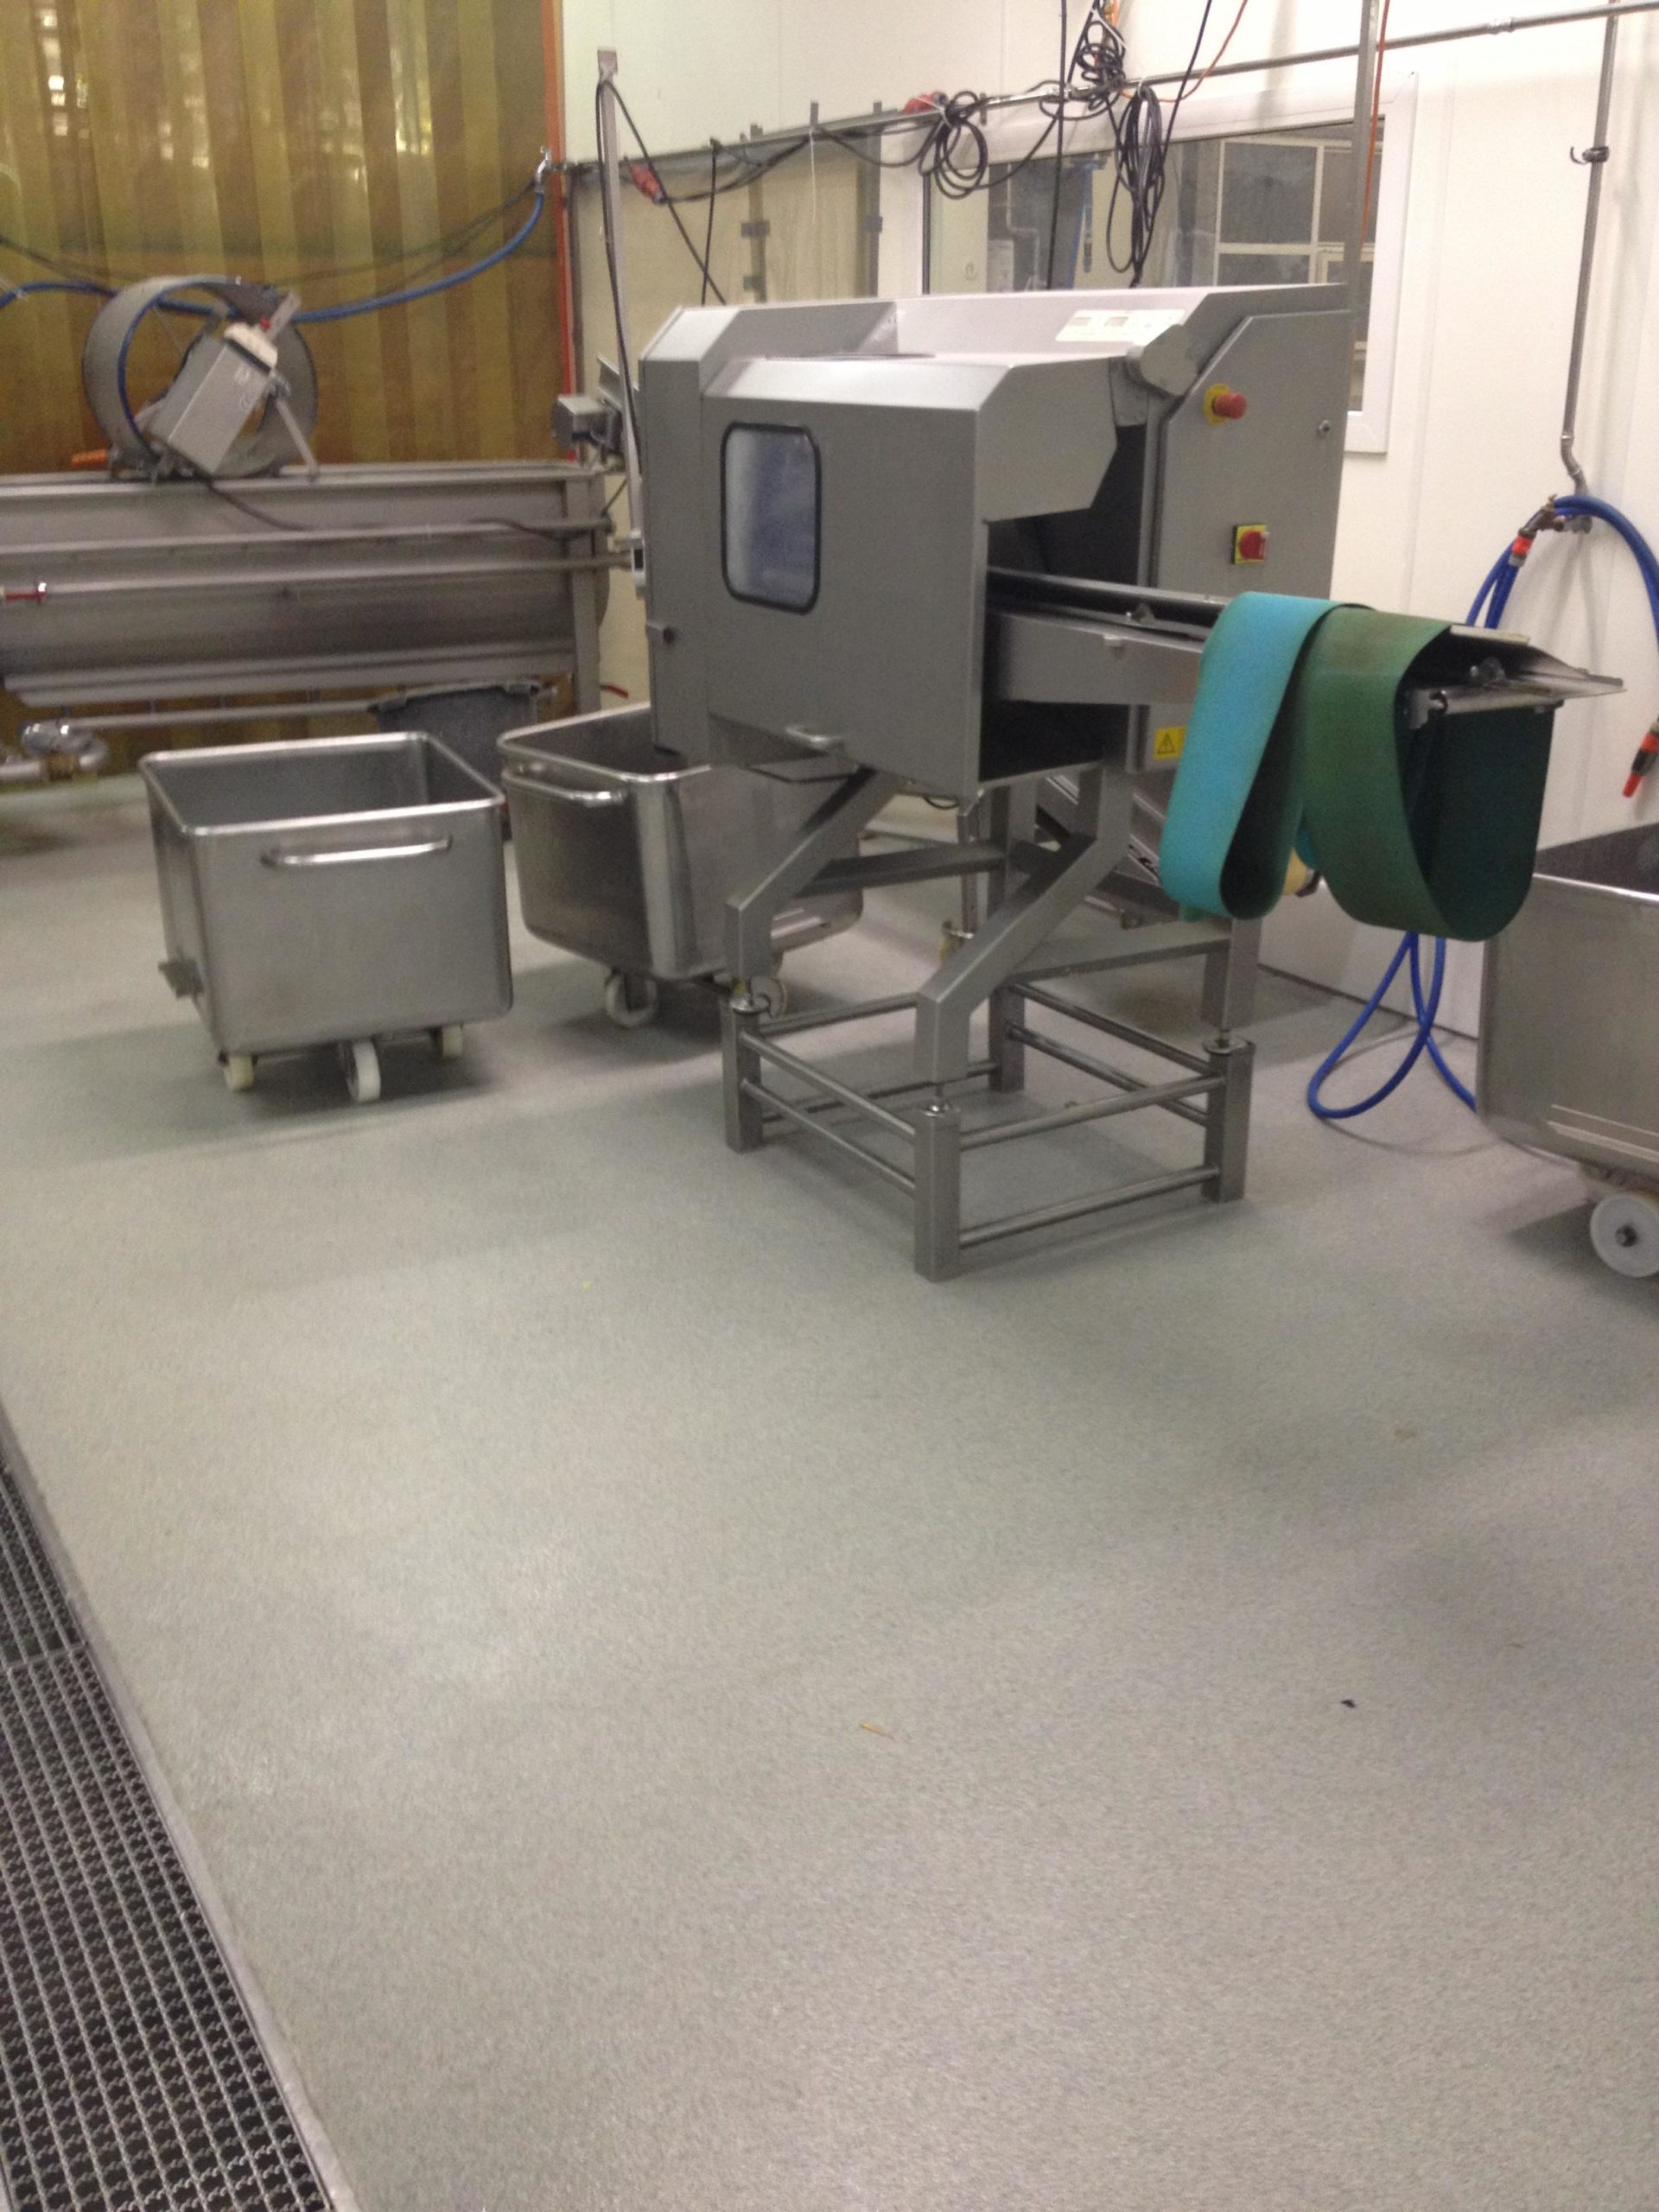 nbspSeamless Flooring for Meat Seafood Processing | Duraamen Engineered Products Inc